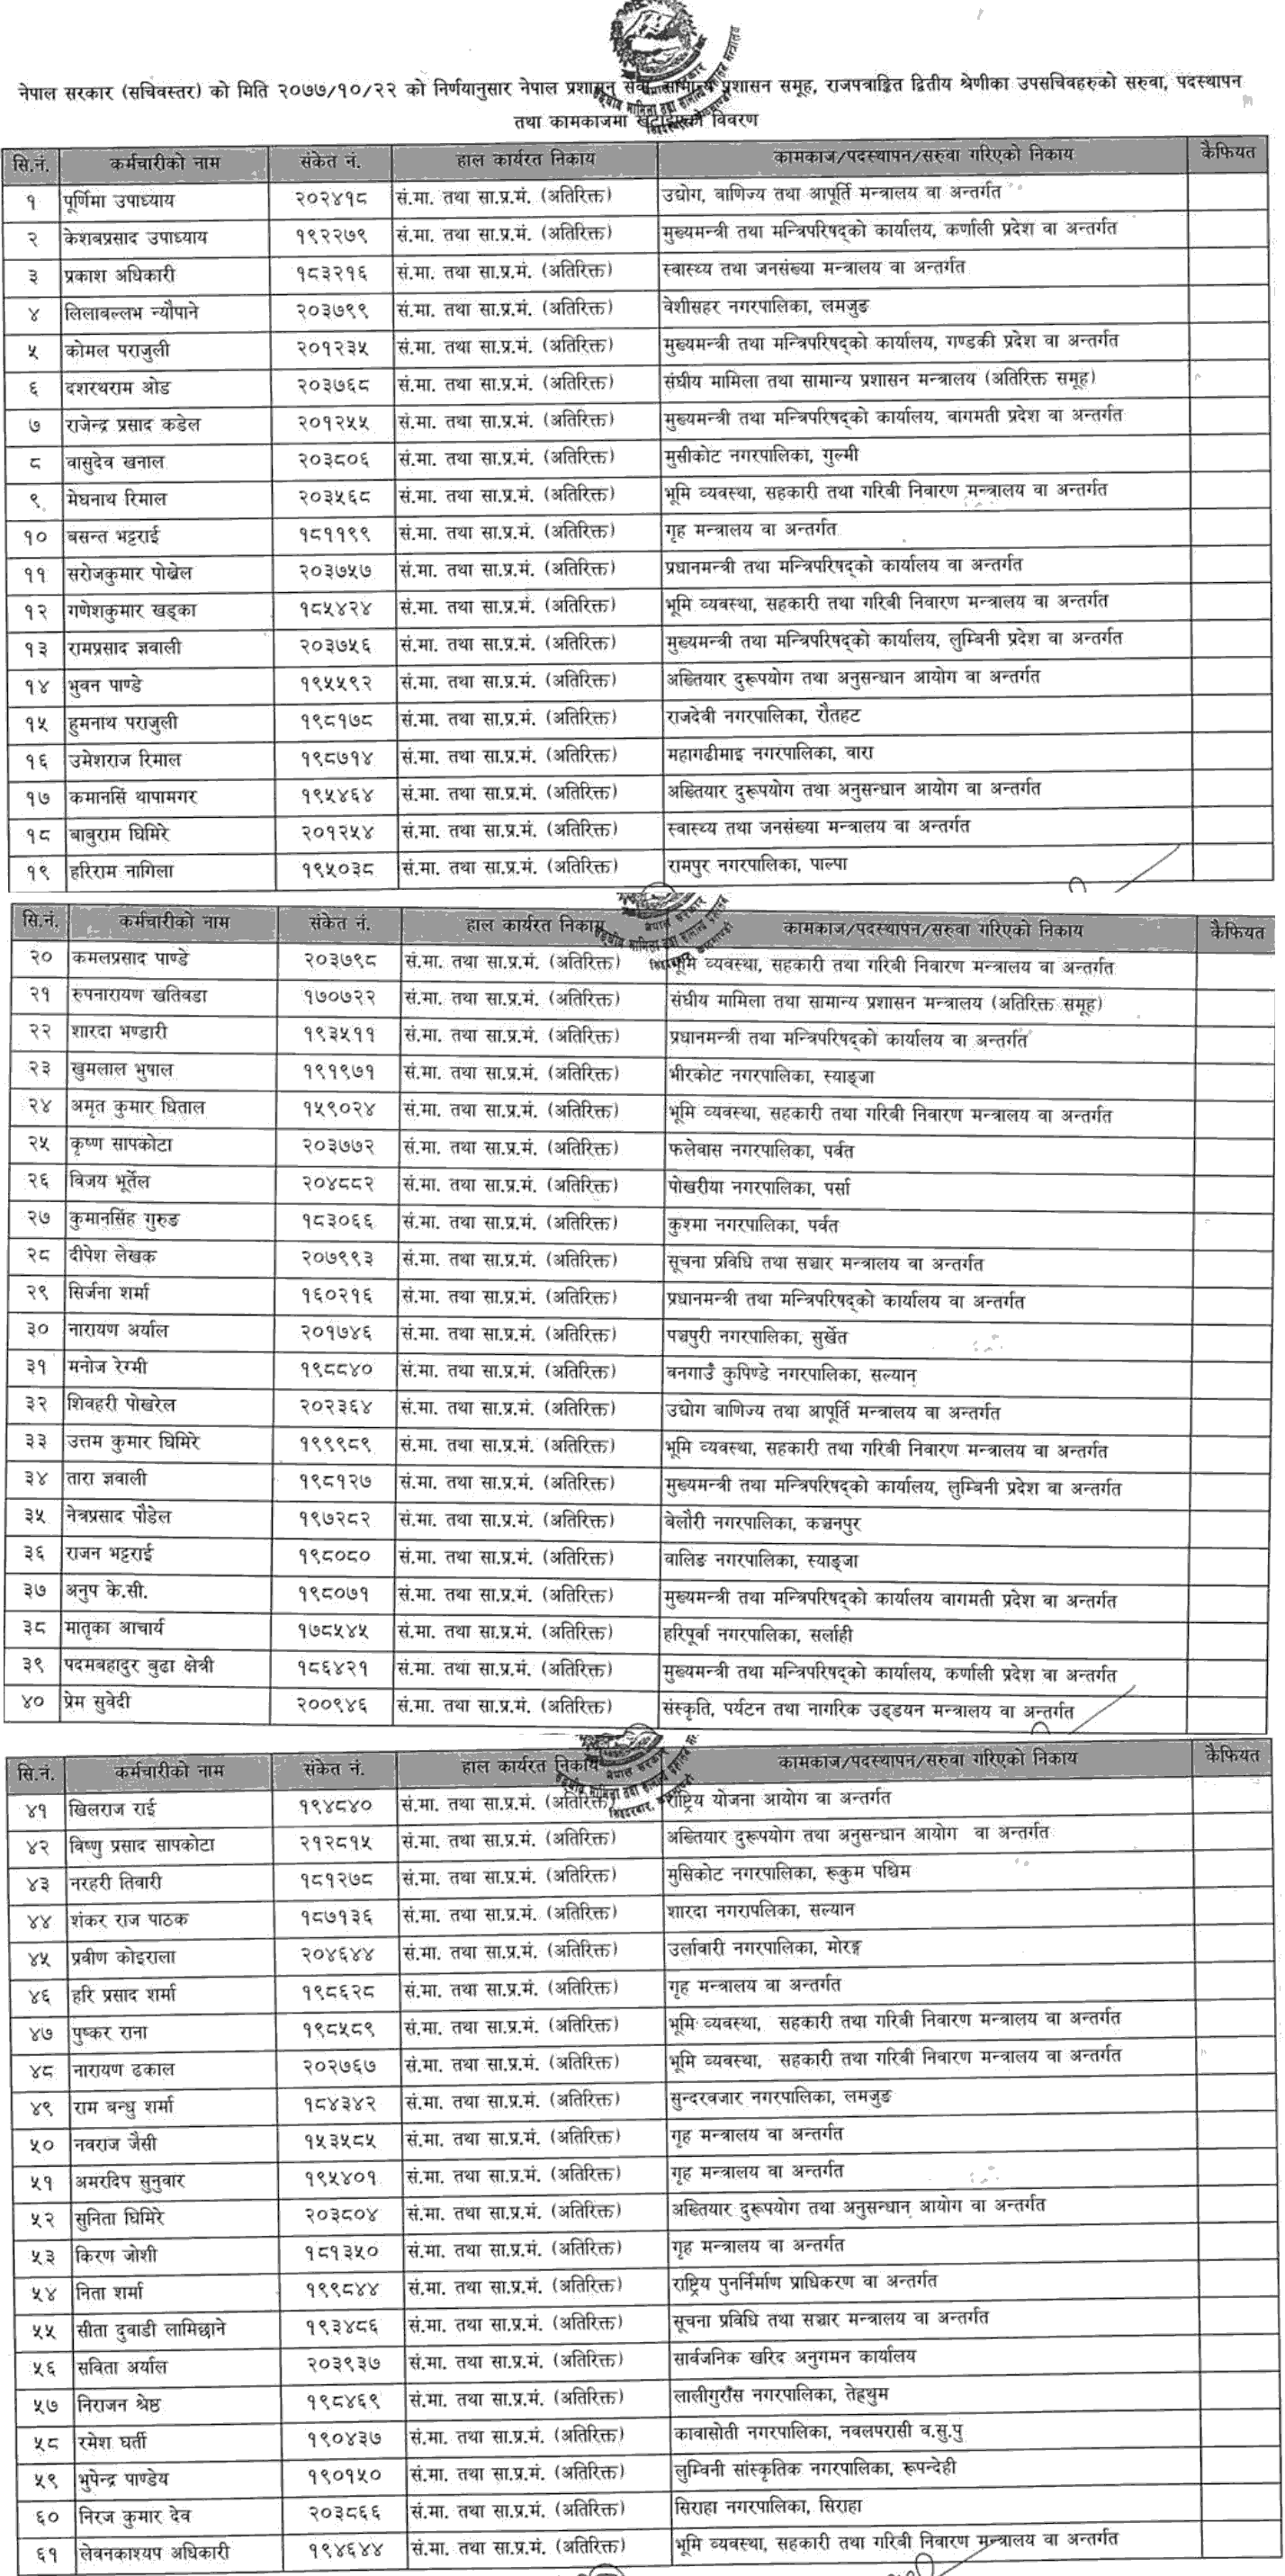 List of Under Secretary Transferred, and New Posting